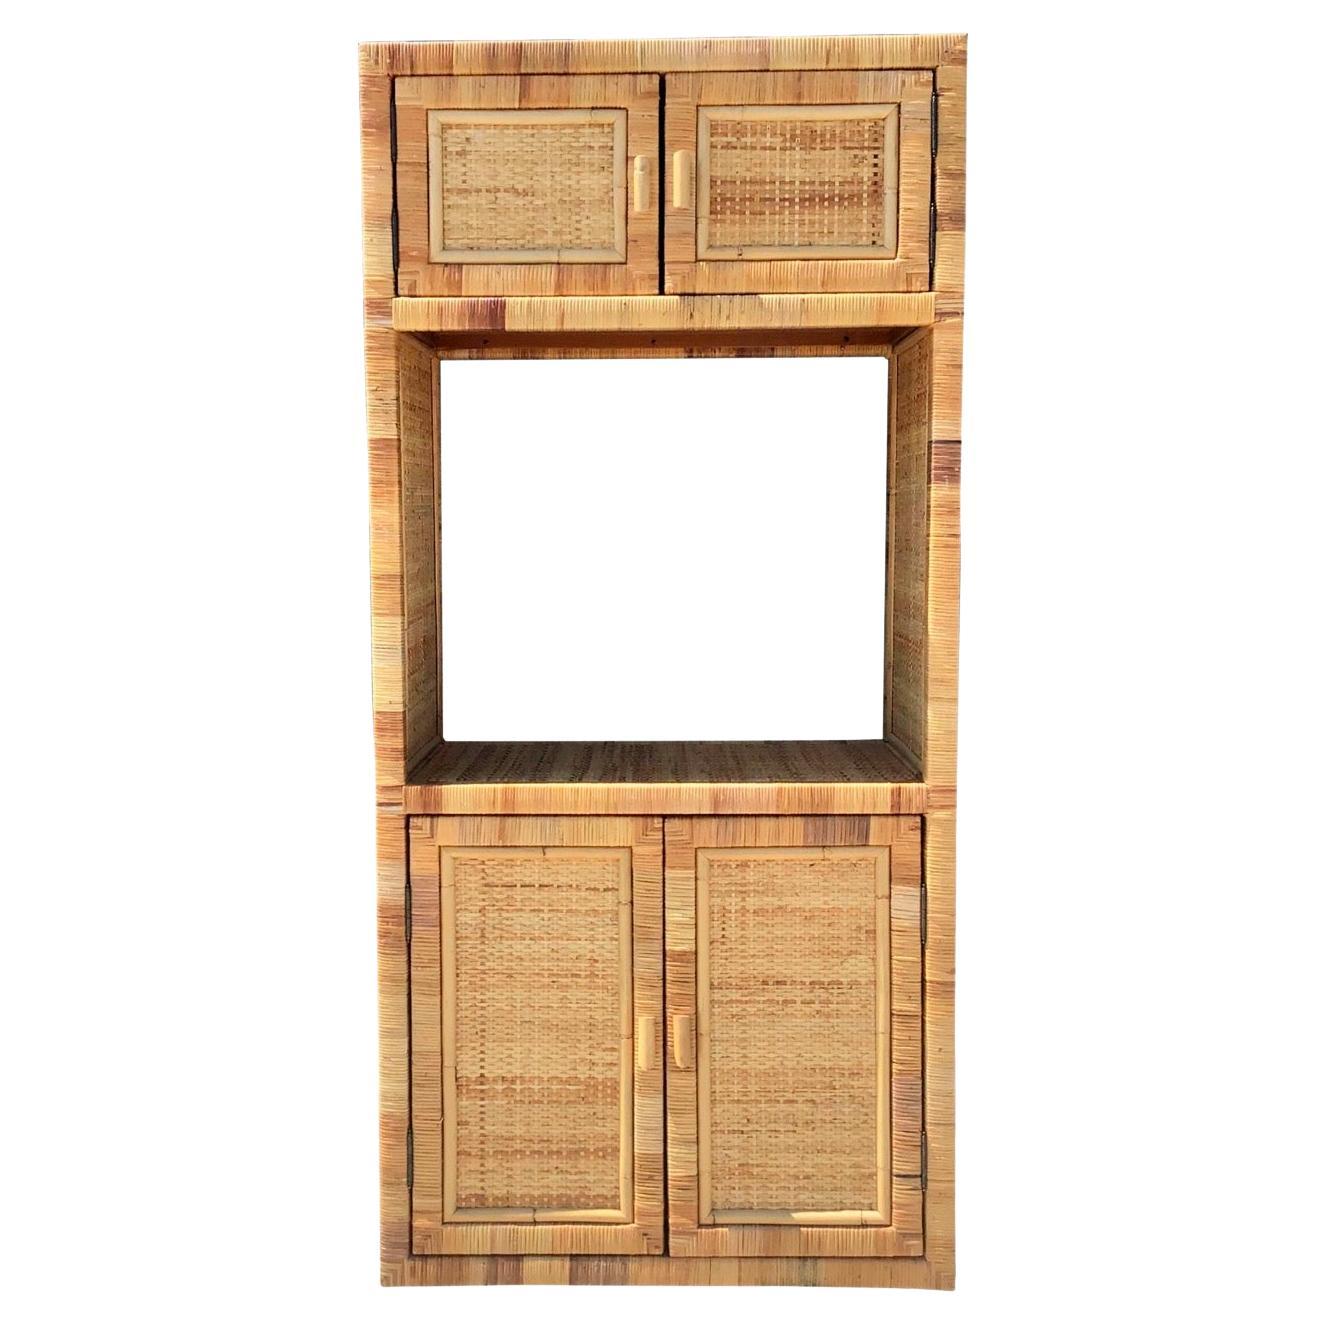 Bielecky Bothers Rattan Bar Etagere with Doors